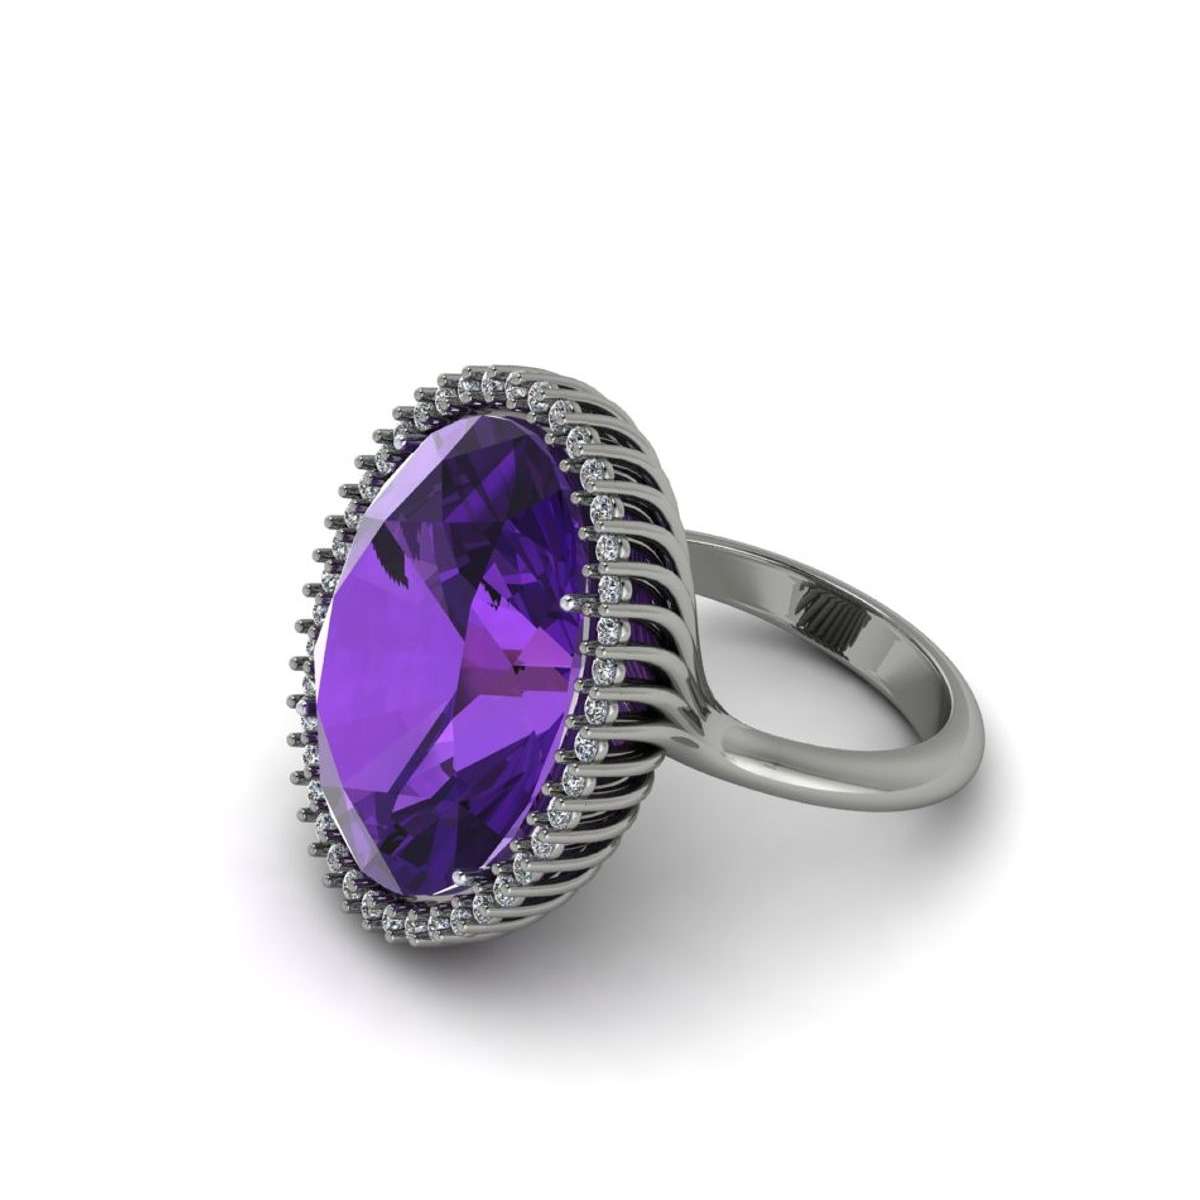 Oval ring for women halo setting purple amethyst 17.00